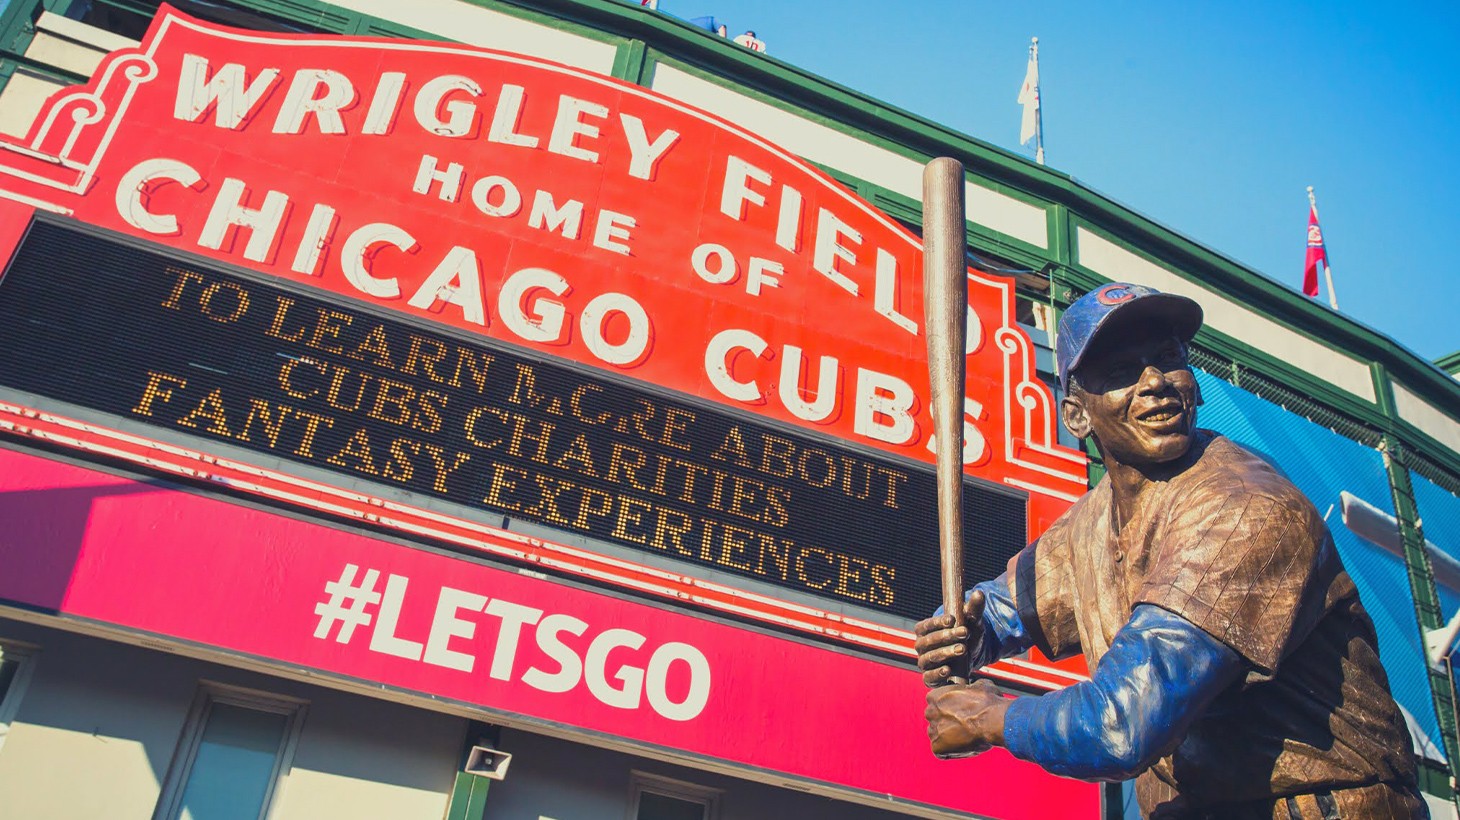 Catch a Game at Chicago's Wrigley Field